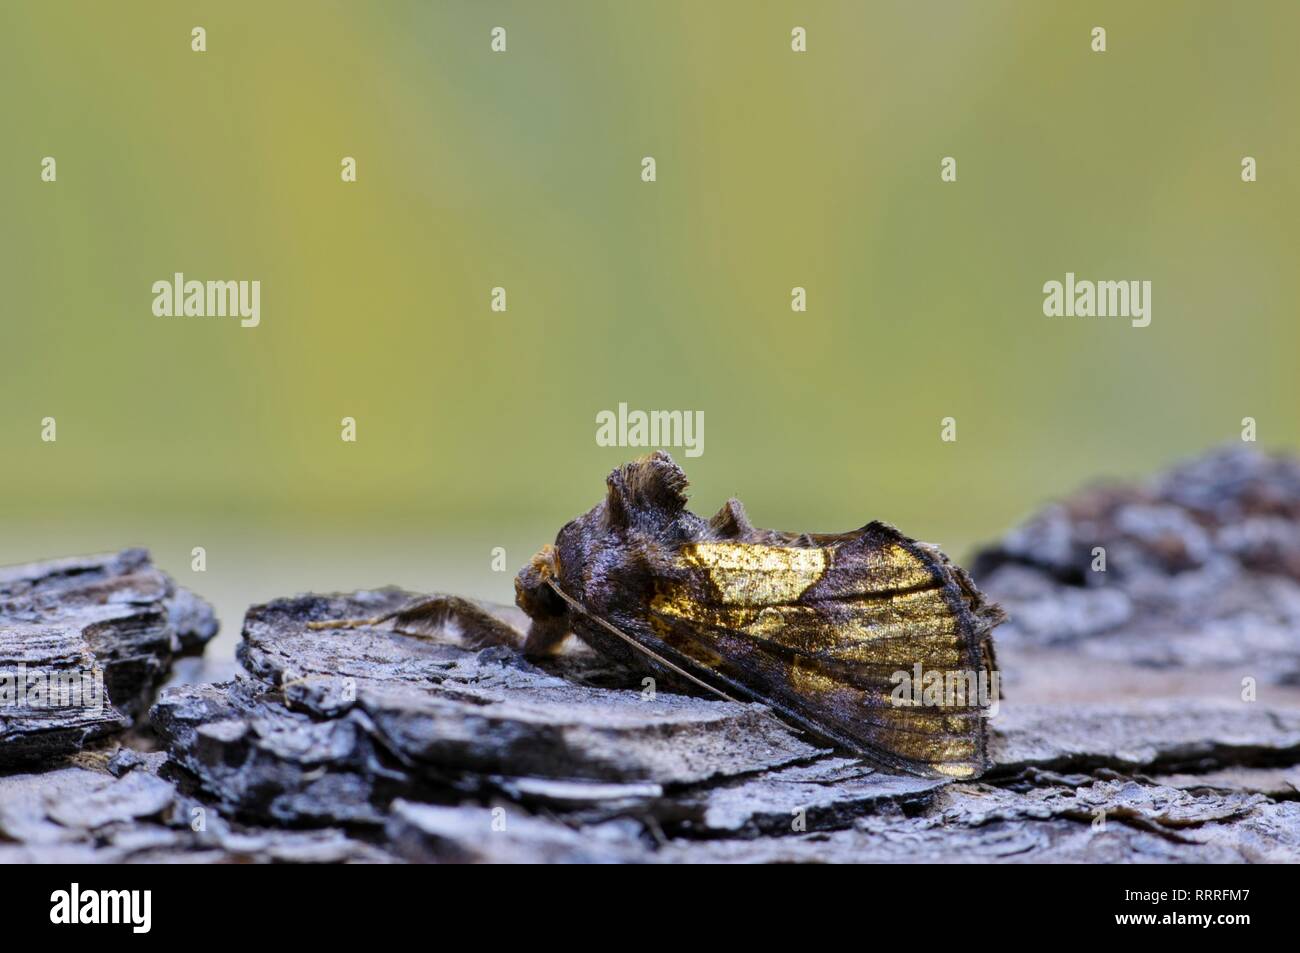 A Golden Looper moth (Argyrogramma verruca) resting on tree bark against a blurred green and yellow nature background in Houston, TX. Stock Photo